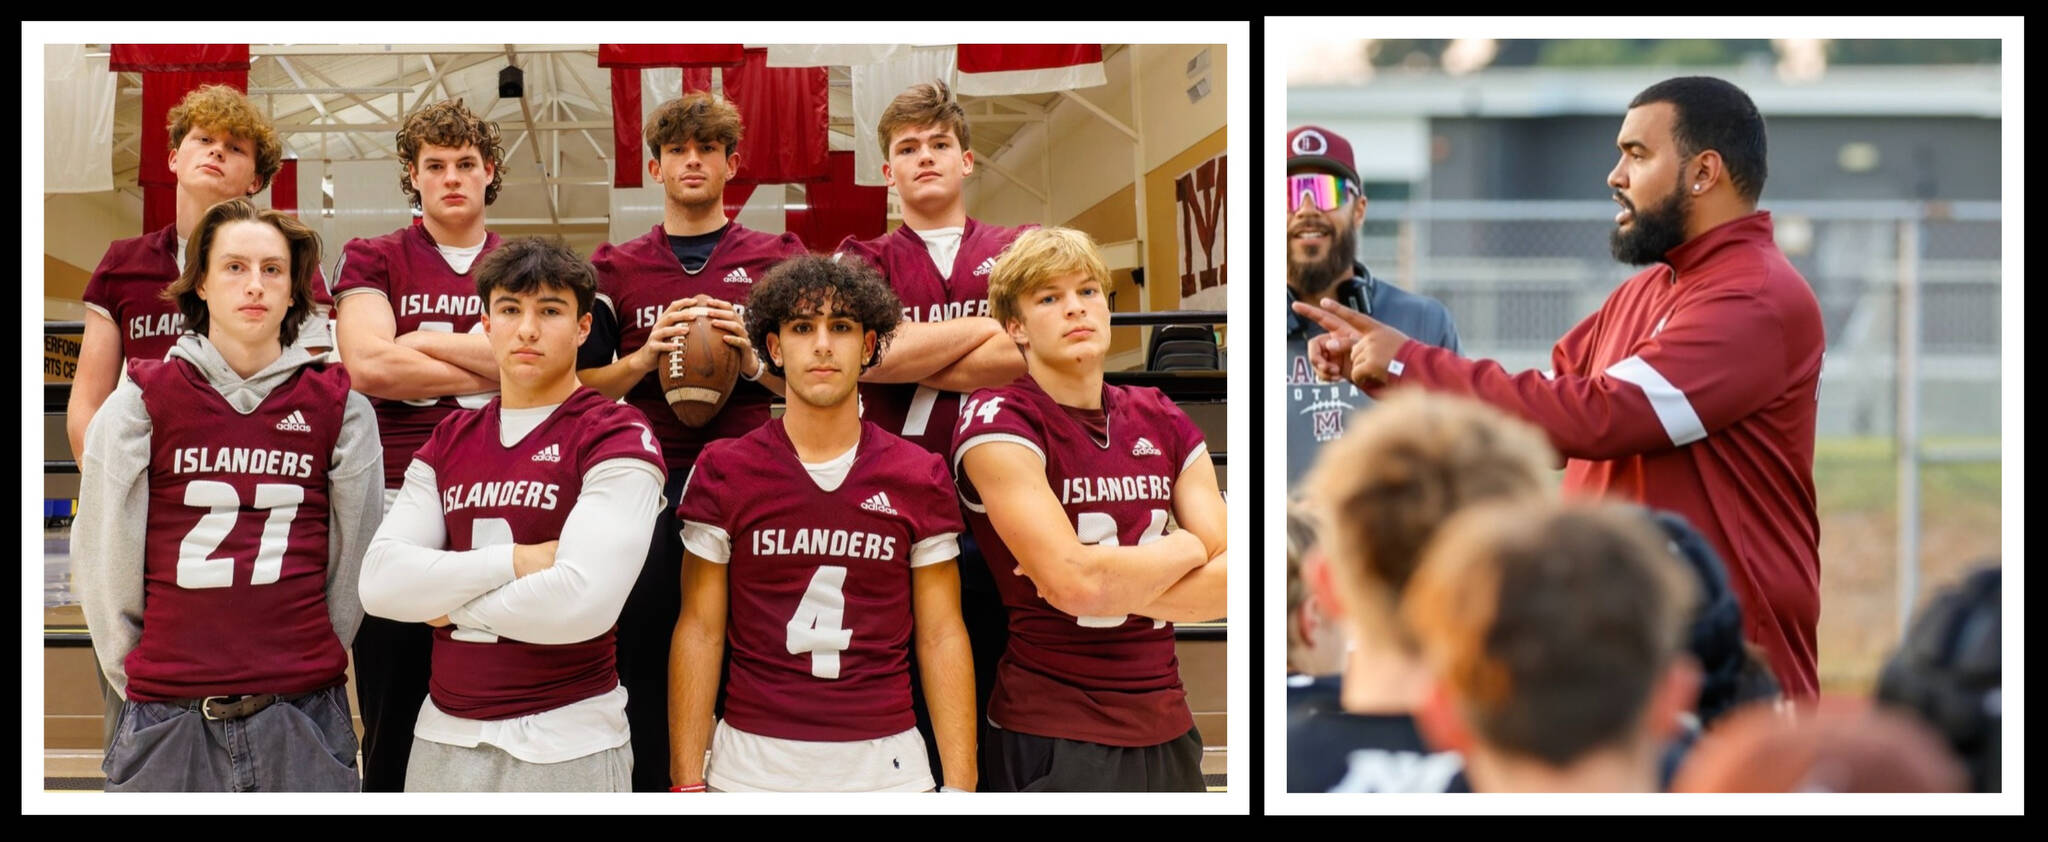 A plethora of Mercer Island High School football players earned 3A All-KingCo honors this season and head coach DJ Mims was named 3A KingCo Coach of the Year. Also pictured are first- and second-teamers: Top left to right, Ryan Boyle (second team wide receiver), Jacob Simon (second team offensive line), Spencer Kornblum (second team quarterback) and Griffin King (first team offensive line); bottom left to right, Ethan Kercher (second team punter), Cole Krawiec (first team running back), Elan Gotel (second team cornerback) and Luke Myklebust (second team linebacker). Honorable mentions are: Gavin Shea (offensive line), Tyler Williamson (tight end), Jack Buchan (linebacker) and Ryder Davis (defensive back). Photos courtesy of Linda Kercher